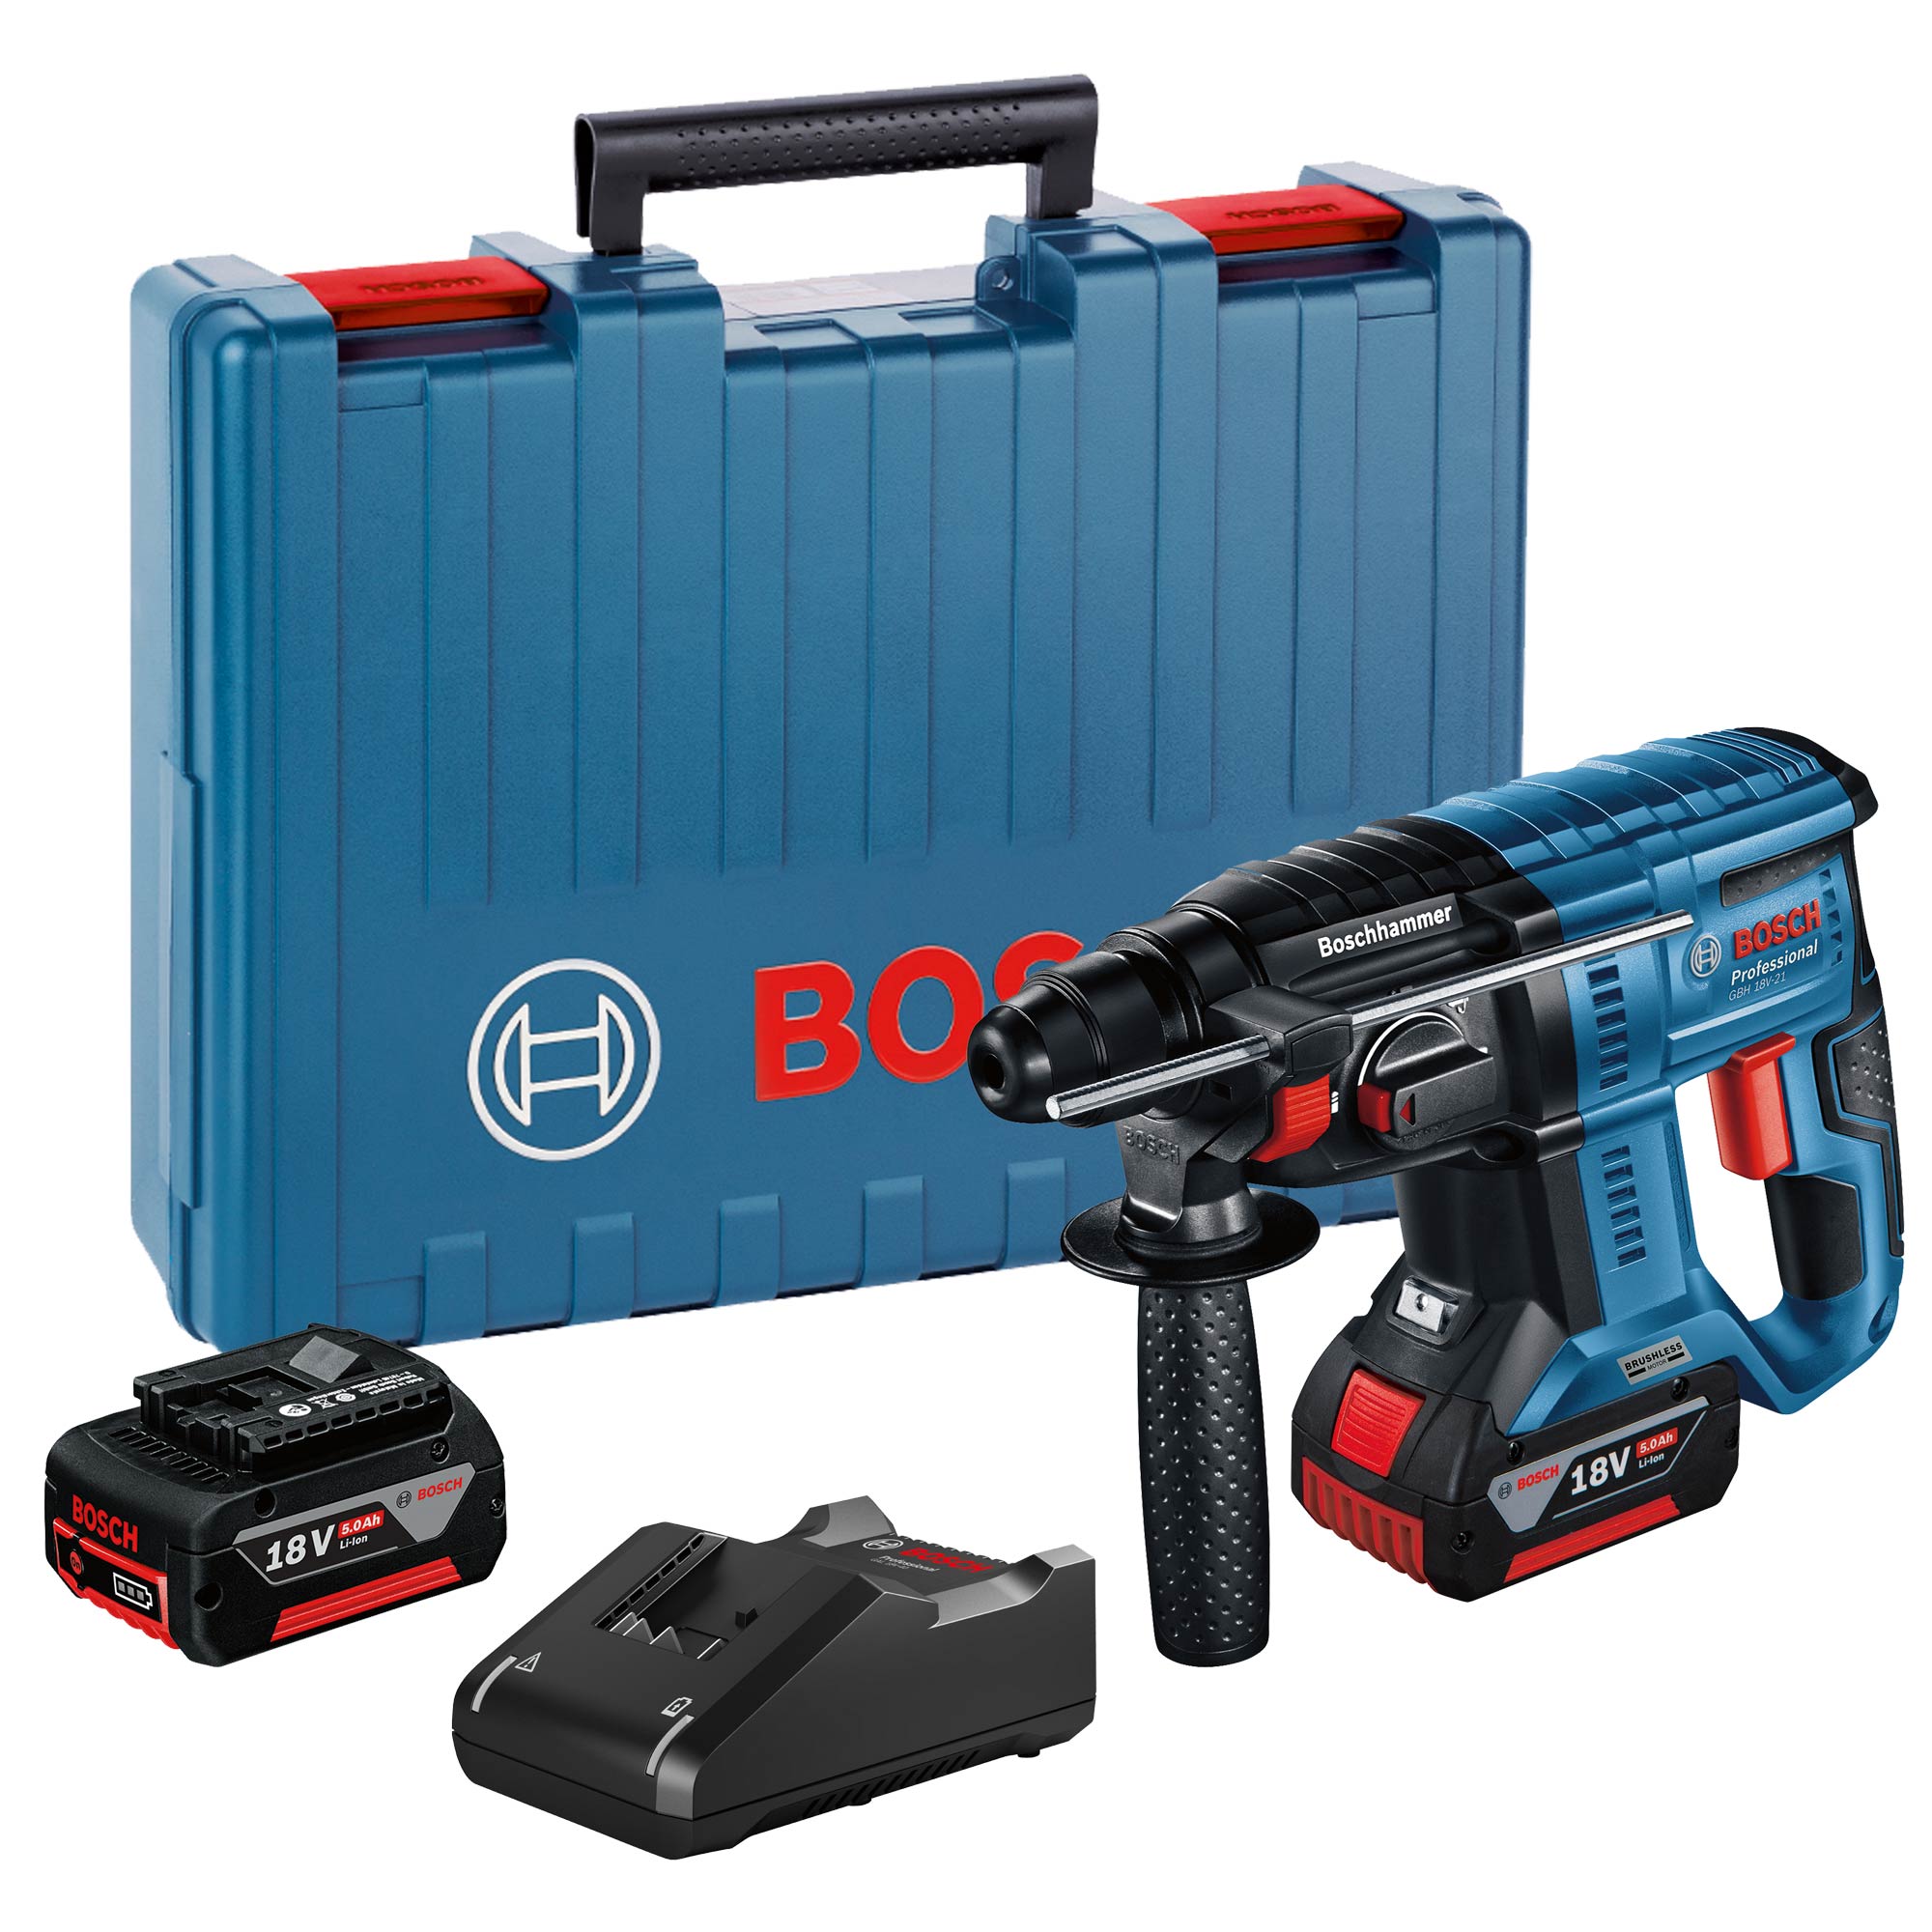 Bosch Professional GBH 18V-21 18V System Cordless Hammer Drill (Max. Impact  Energy 2 J, Batteries and Charger Not Included)